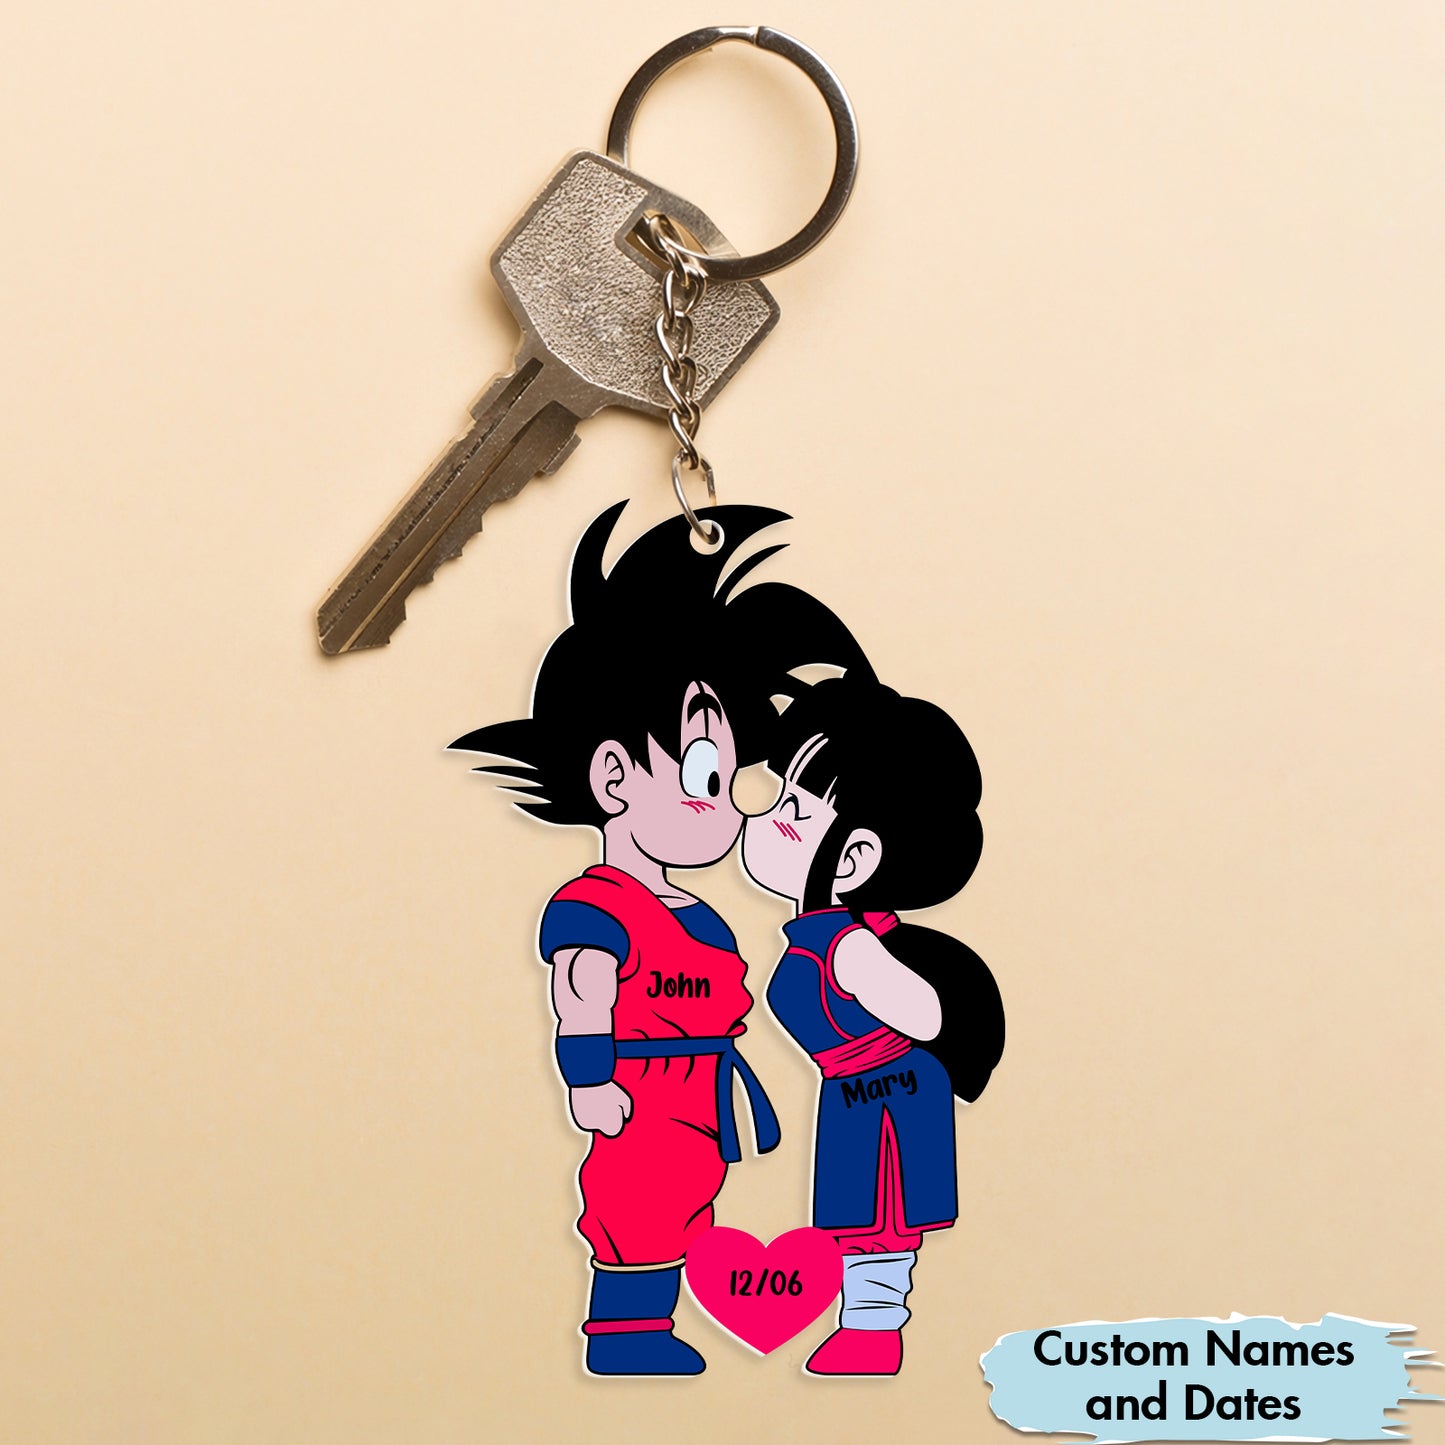 Couple - My Enchanted Heart - Personalized Keychain